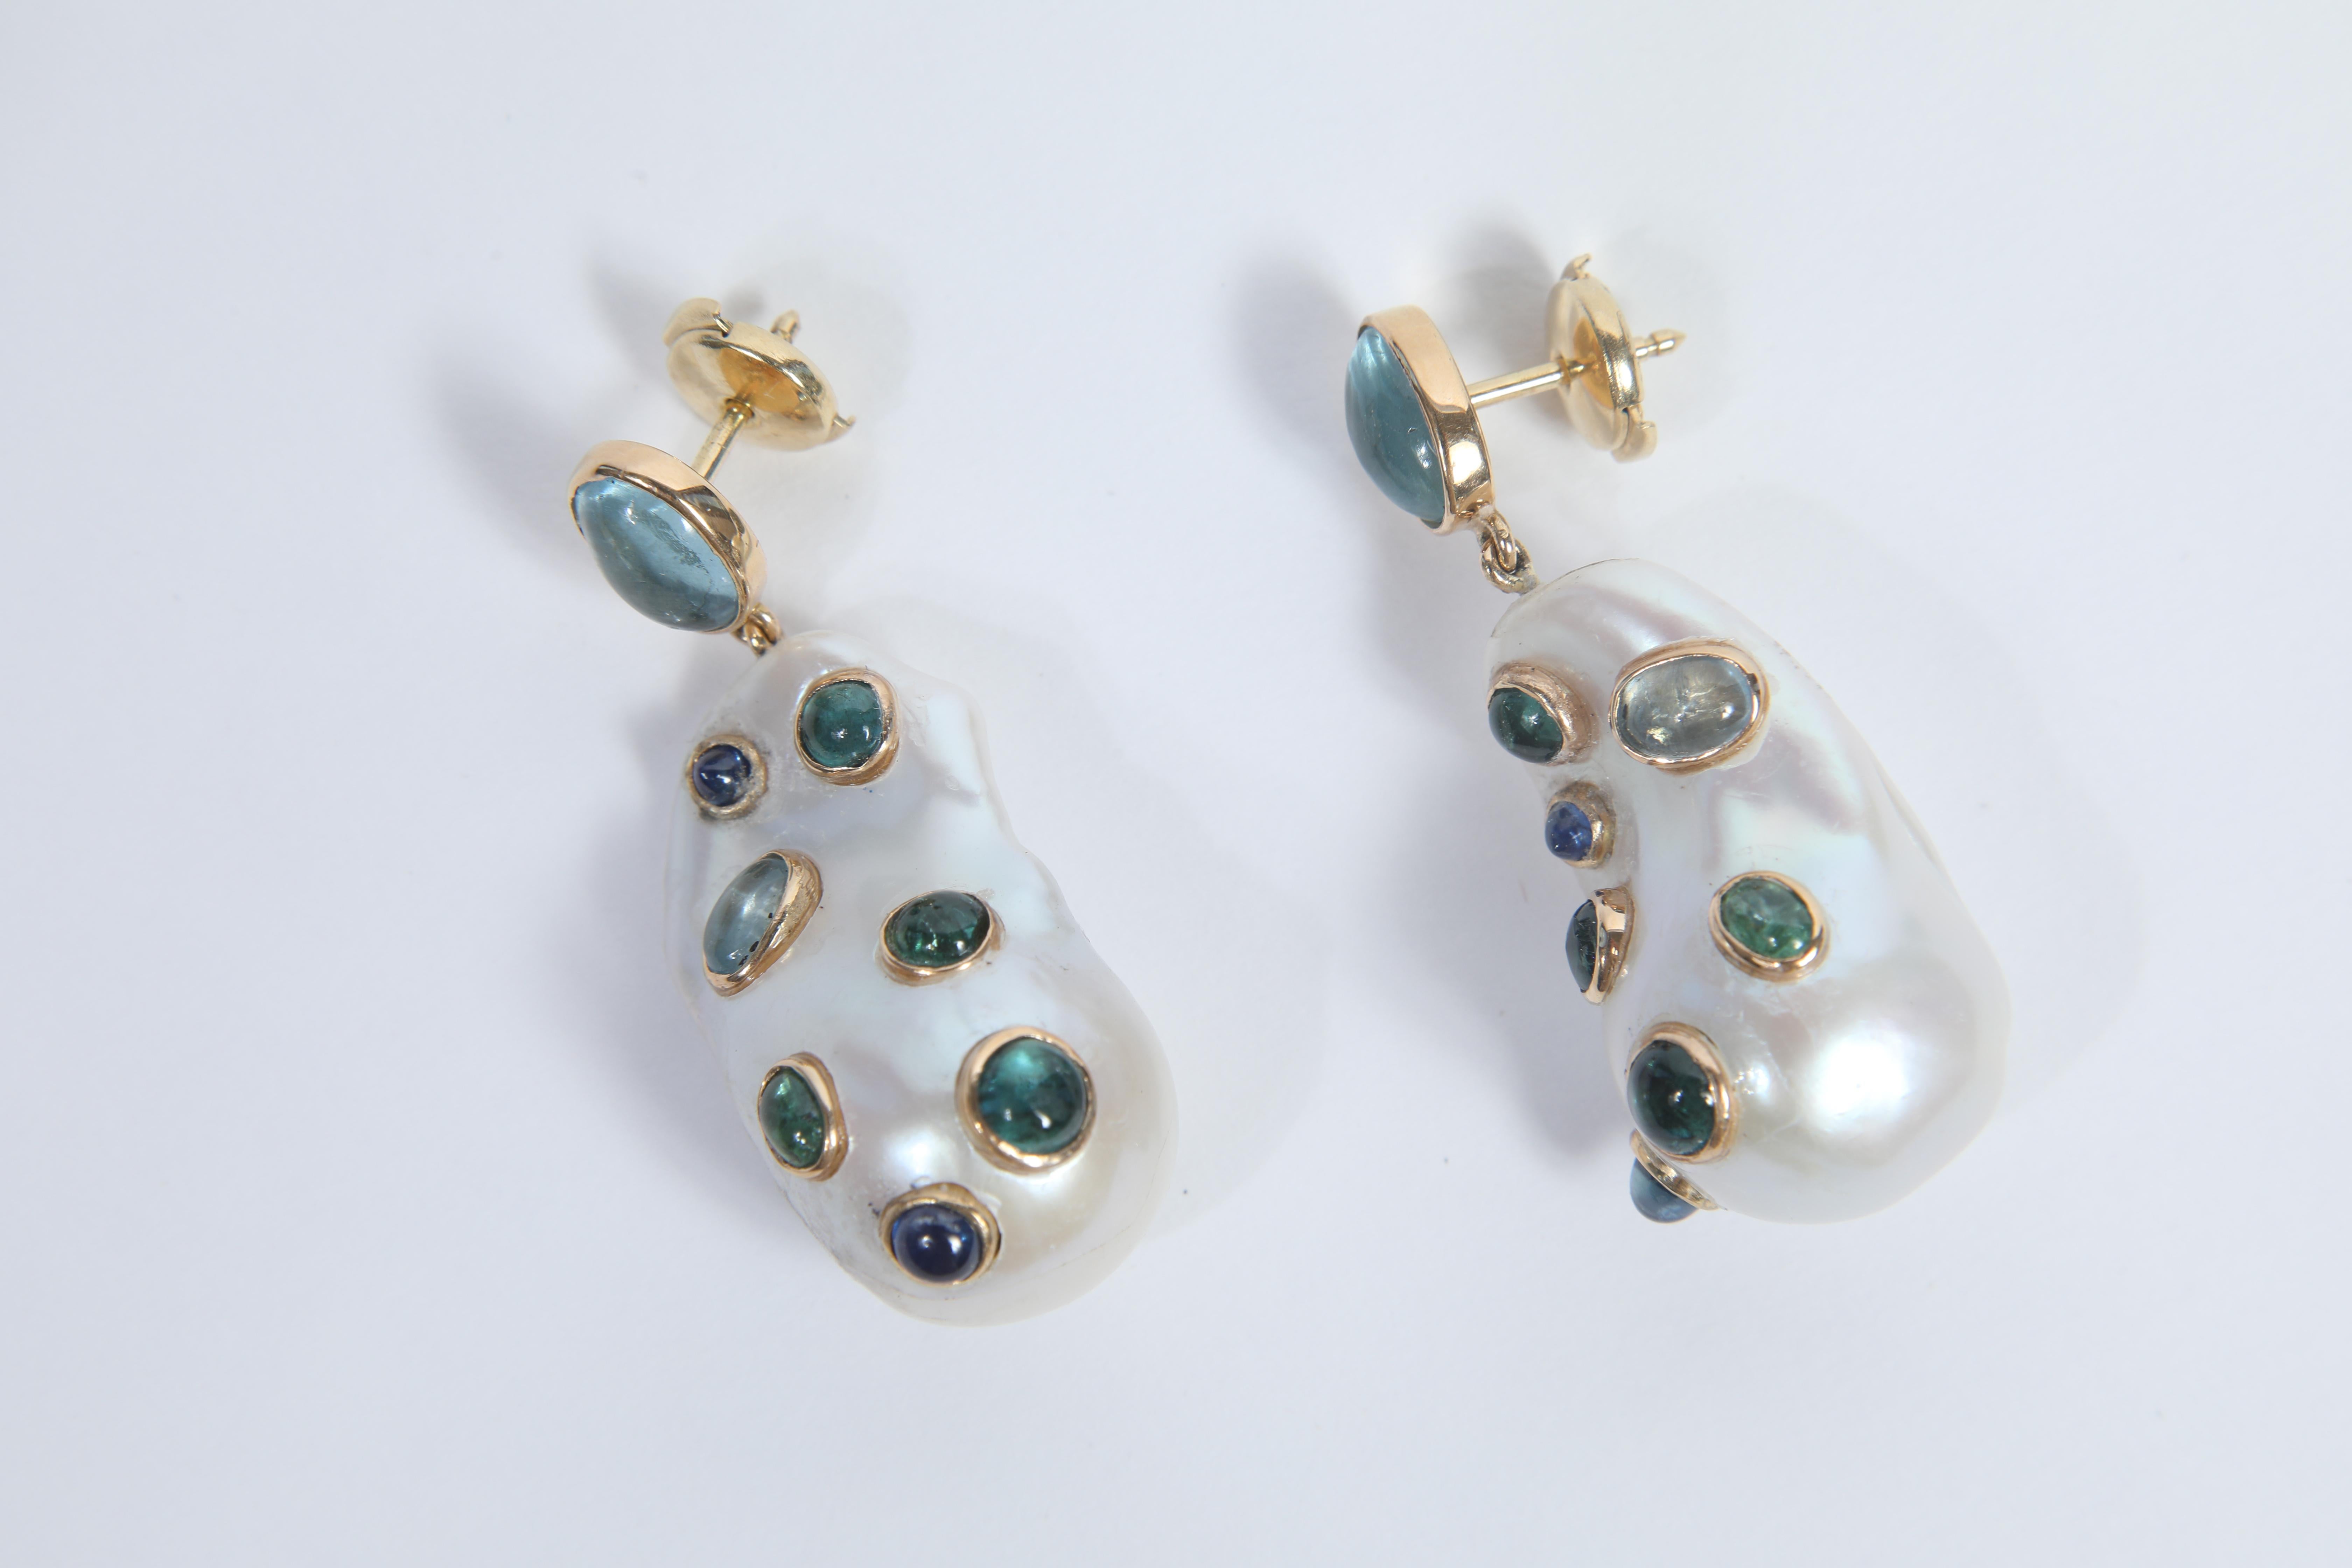 White fresh water pearls earrings, baroque shape, attached to aquamarine cabochons and set with sapphires, green tourmalines and aquamarine cabochons.
18k yellow gold, security Alpa systems.
Price without local taxes
Four aquamarine cabs weight: